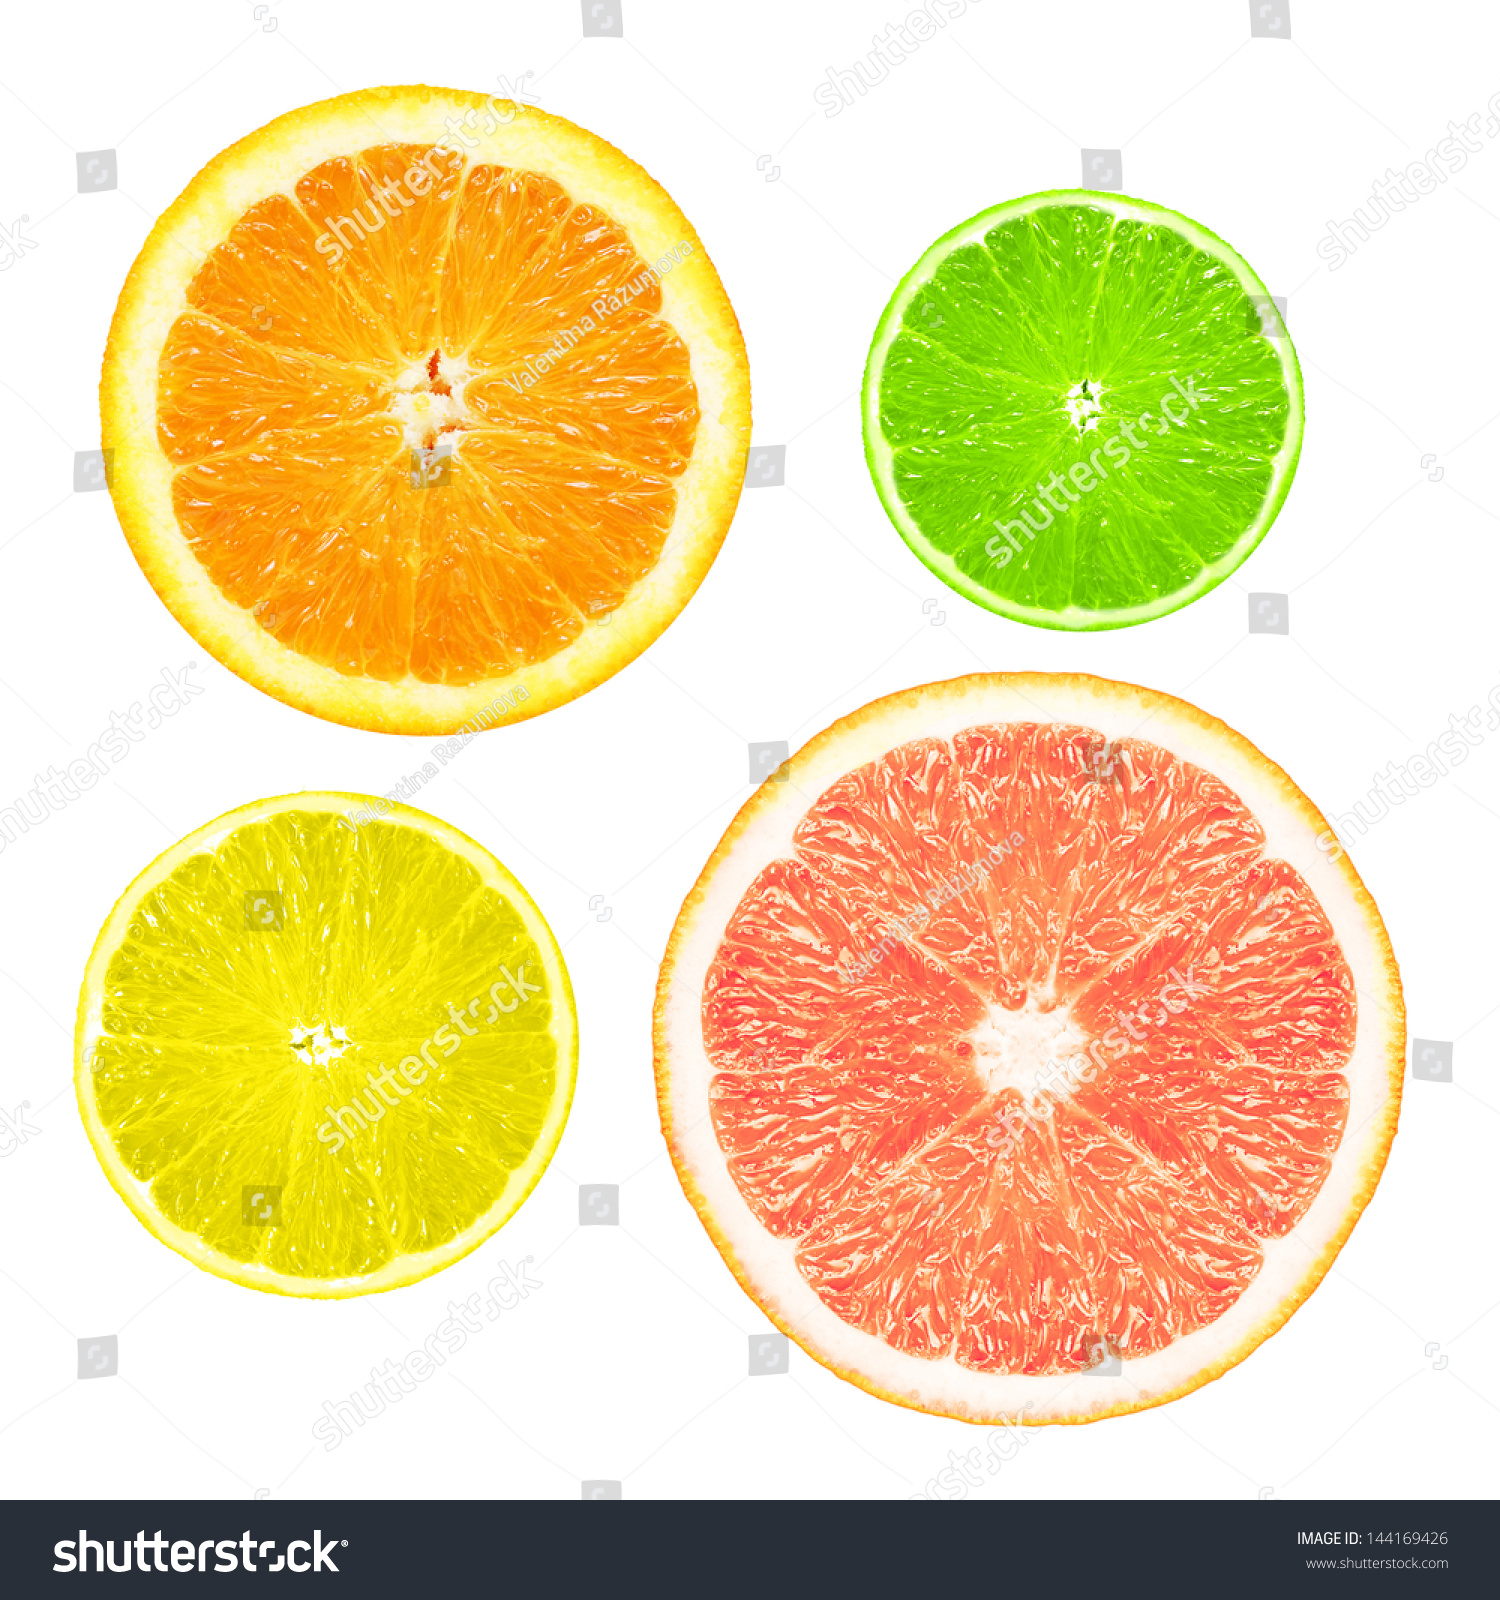 Stack of citrus fruit slices  isolated on white background. #144169426